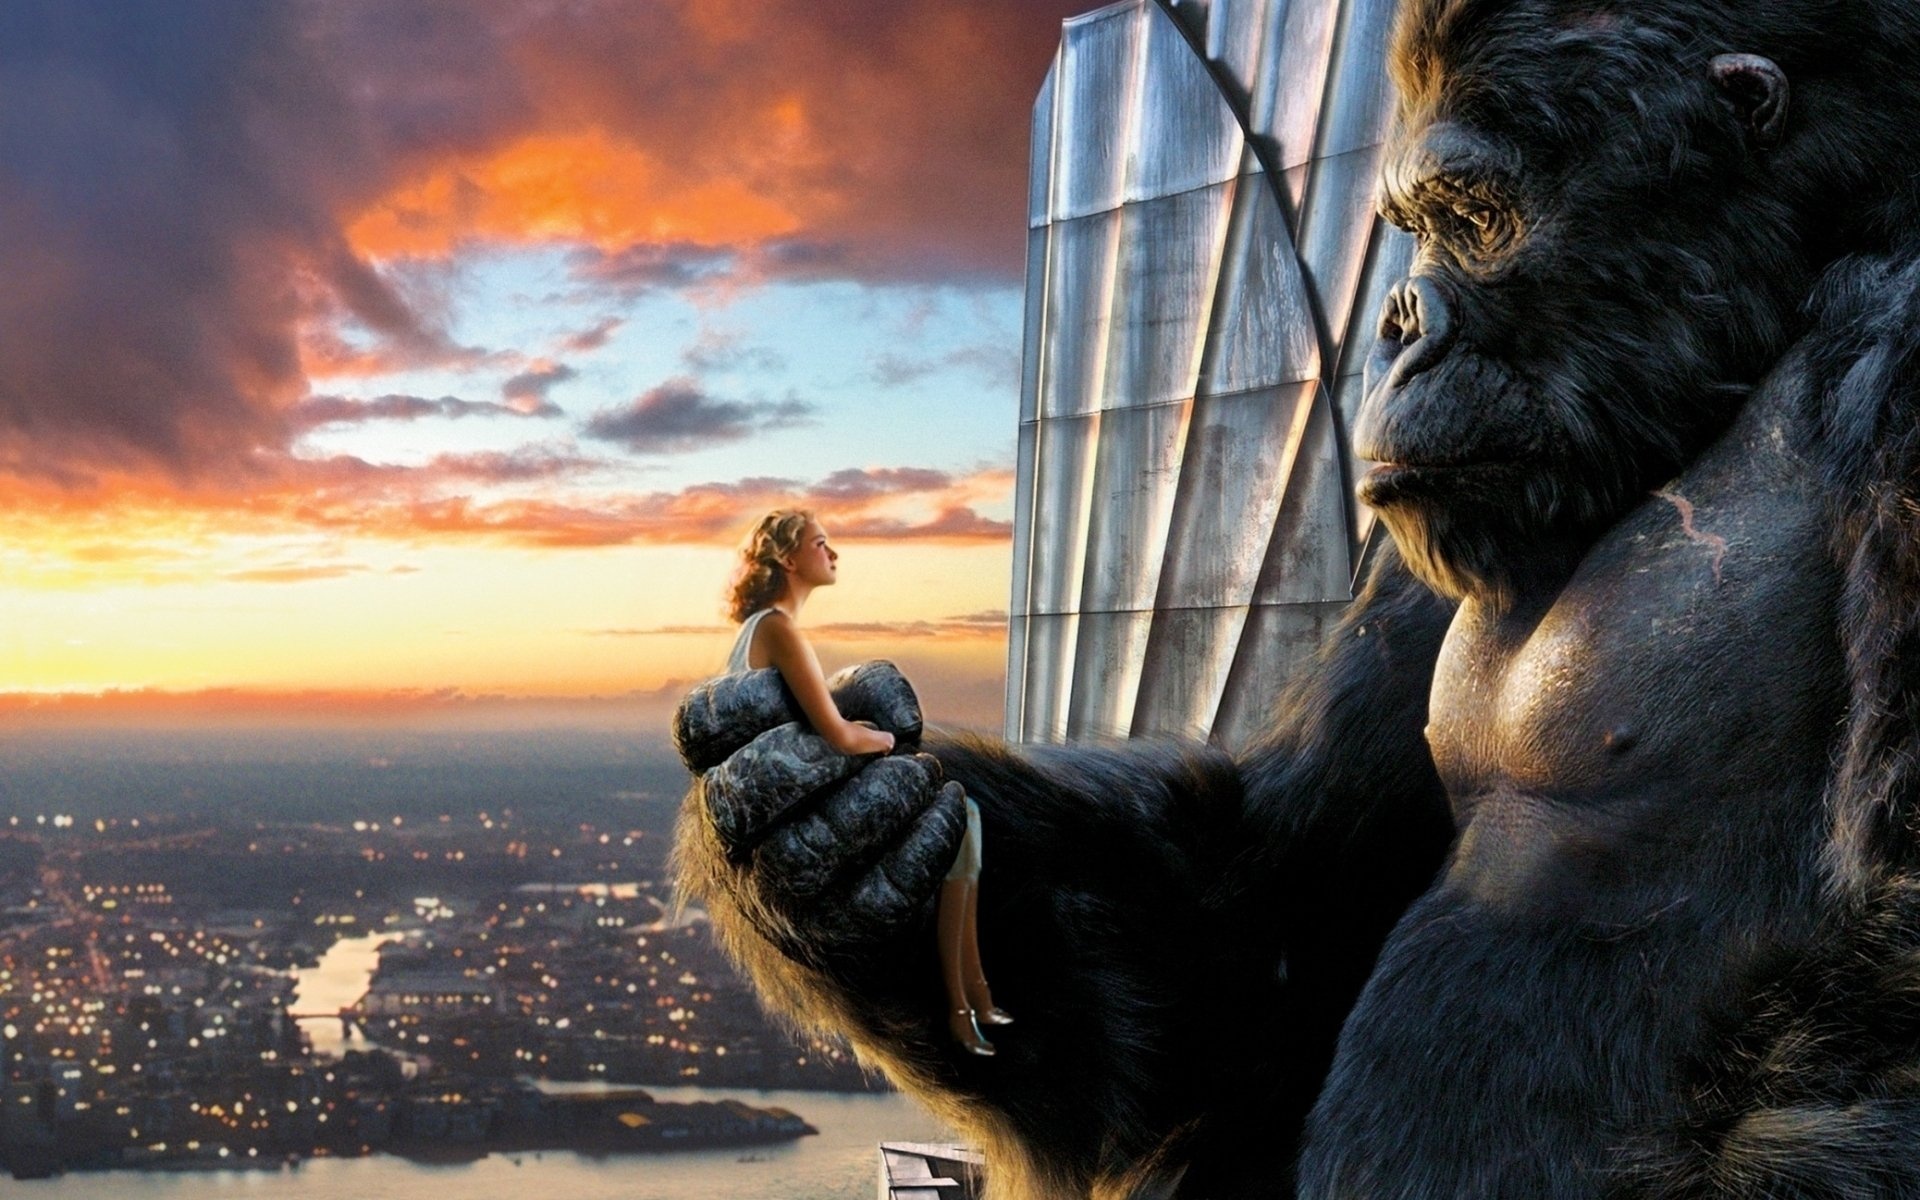 King Kong: A 2005 American giant monster film directed by Peter Jackson and written by Fran Walsh. 1920x1200 HD Wallpaper.